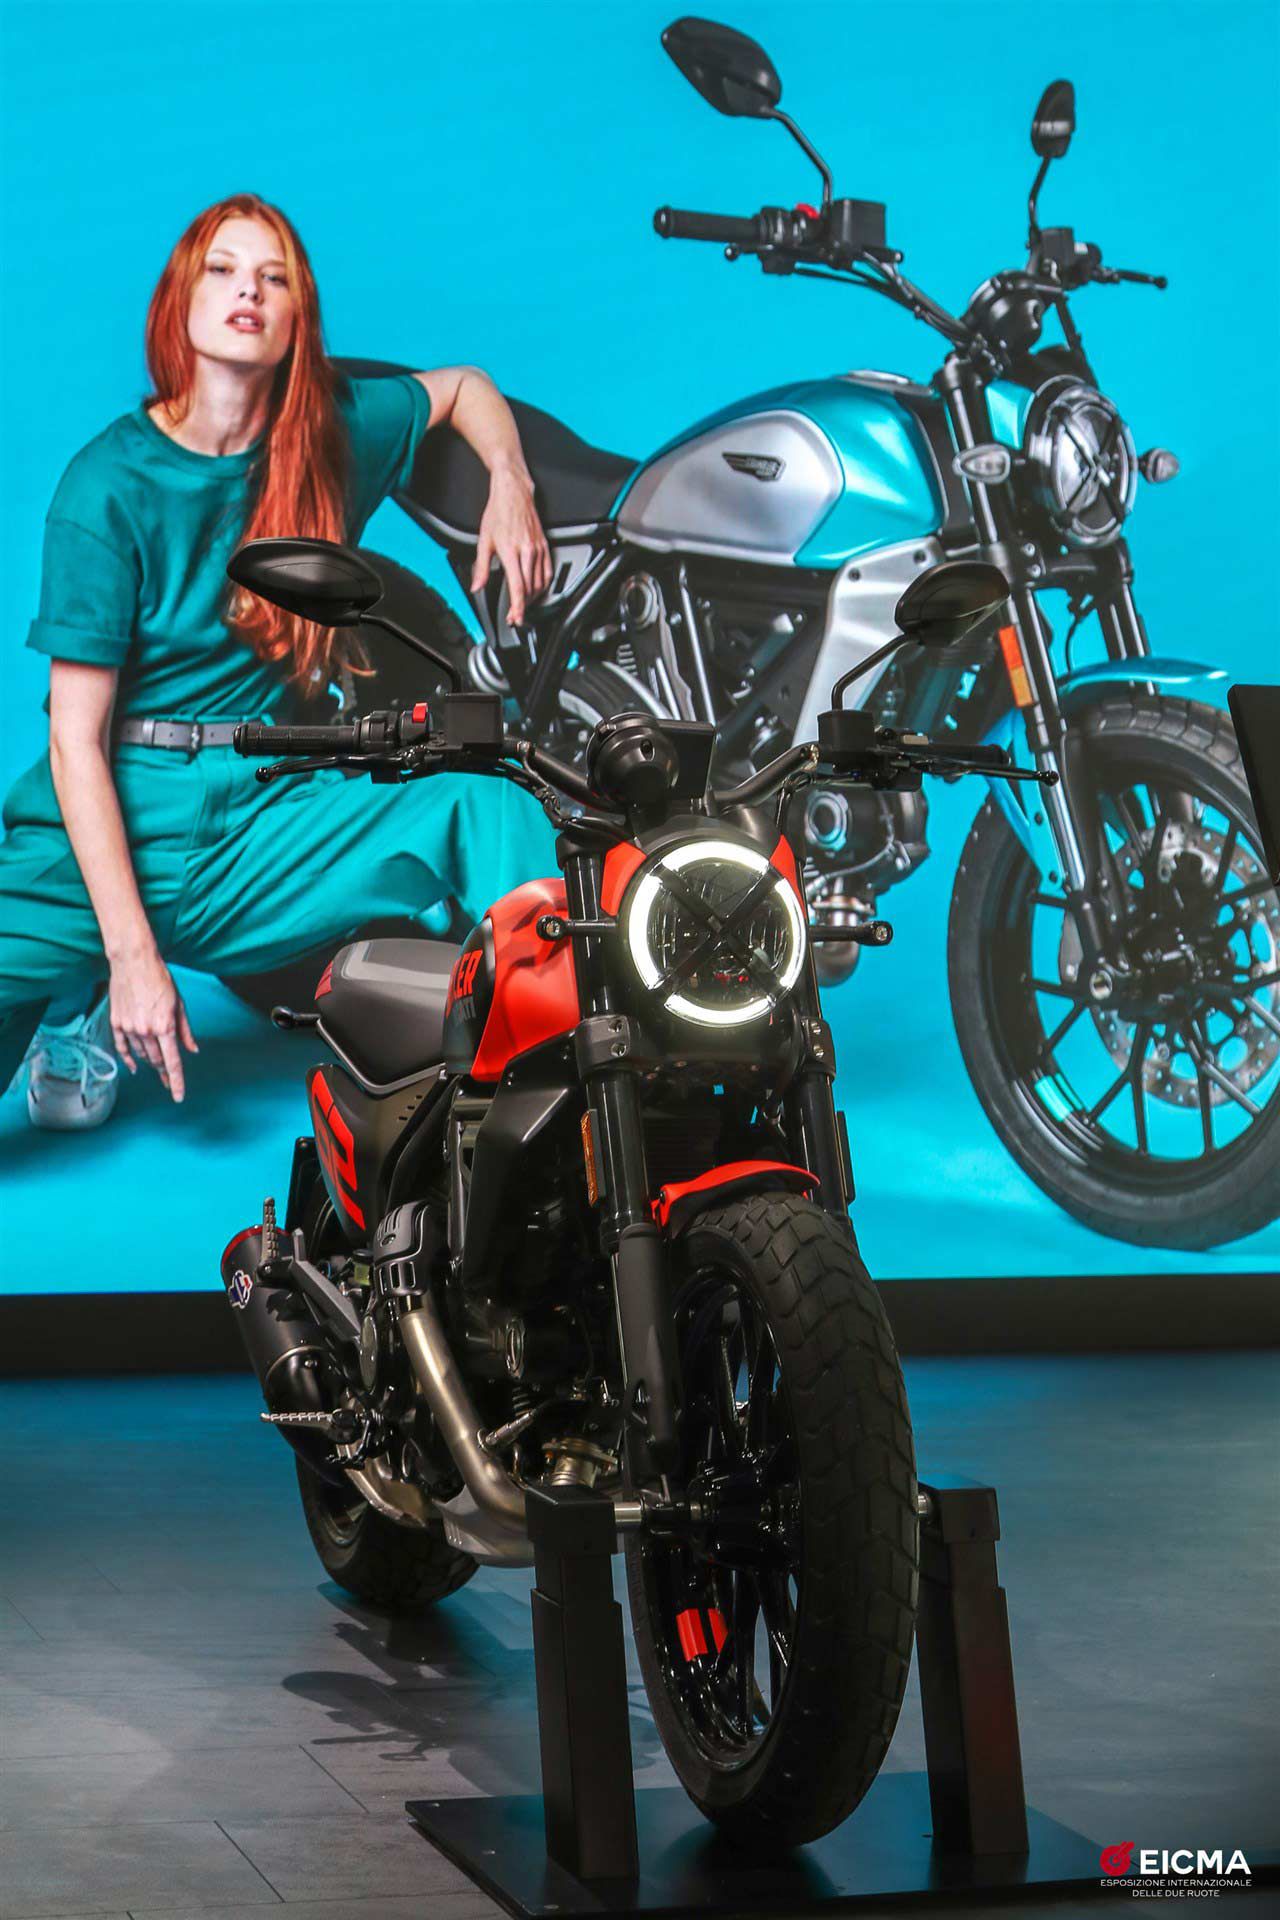 The Ducati Full Throttle Scrambler, with aspirational riding companion in background.